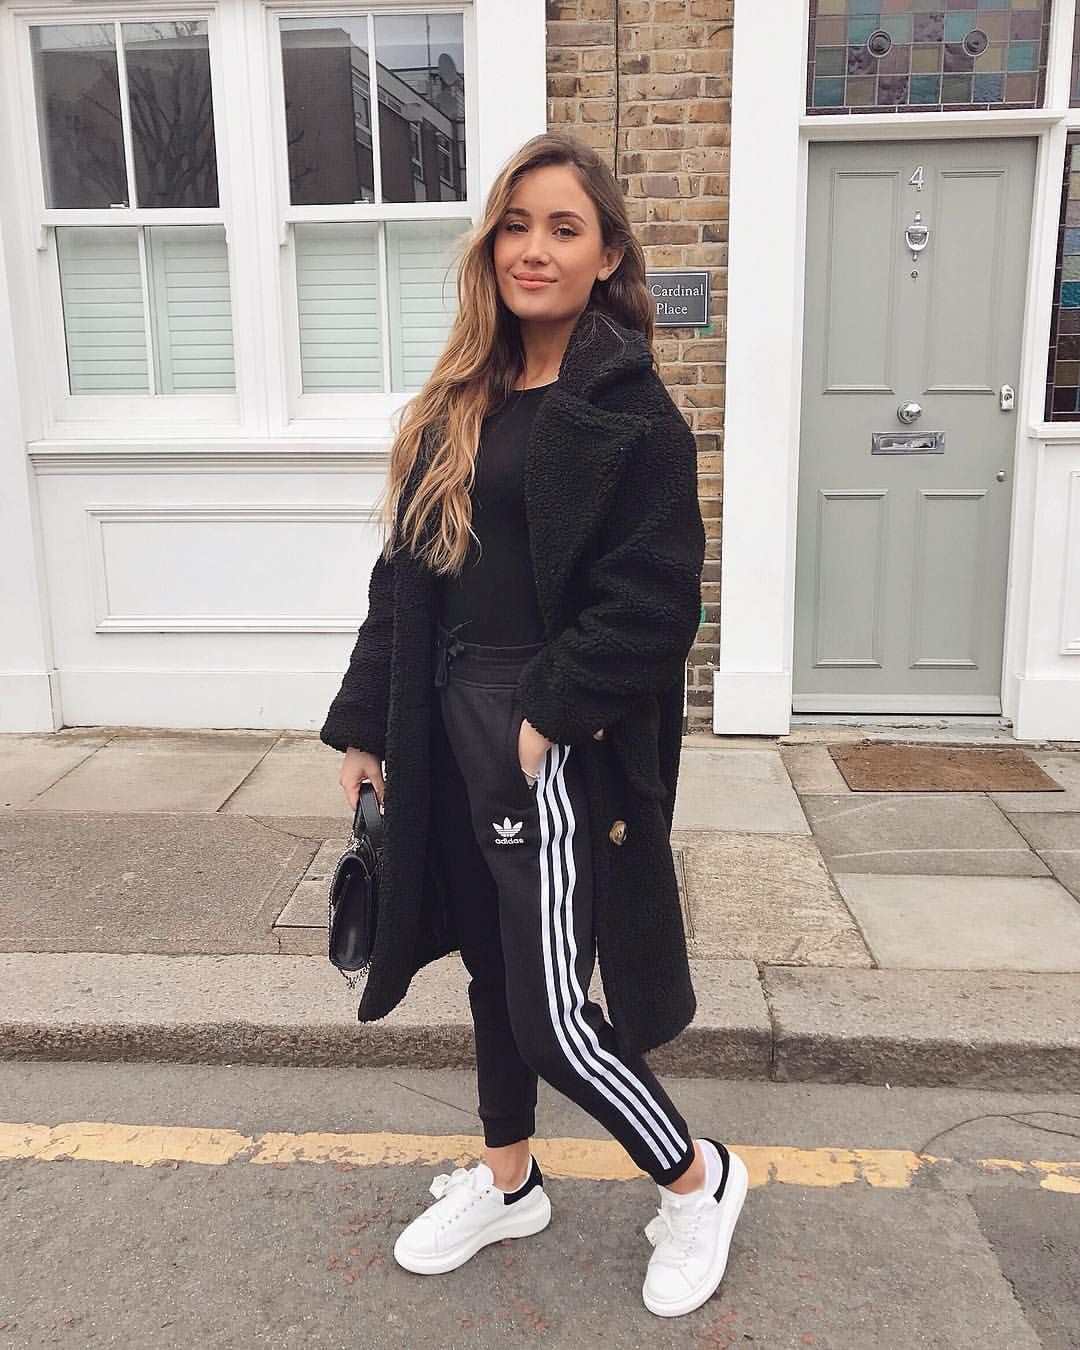 5 Adidas clothing items every fashionista must have